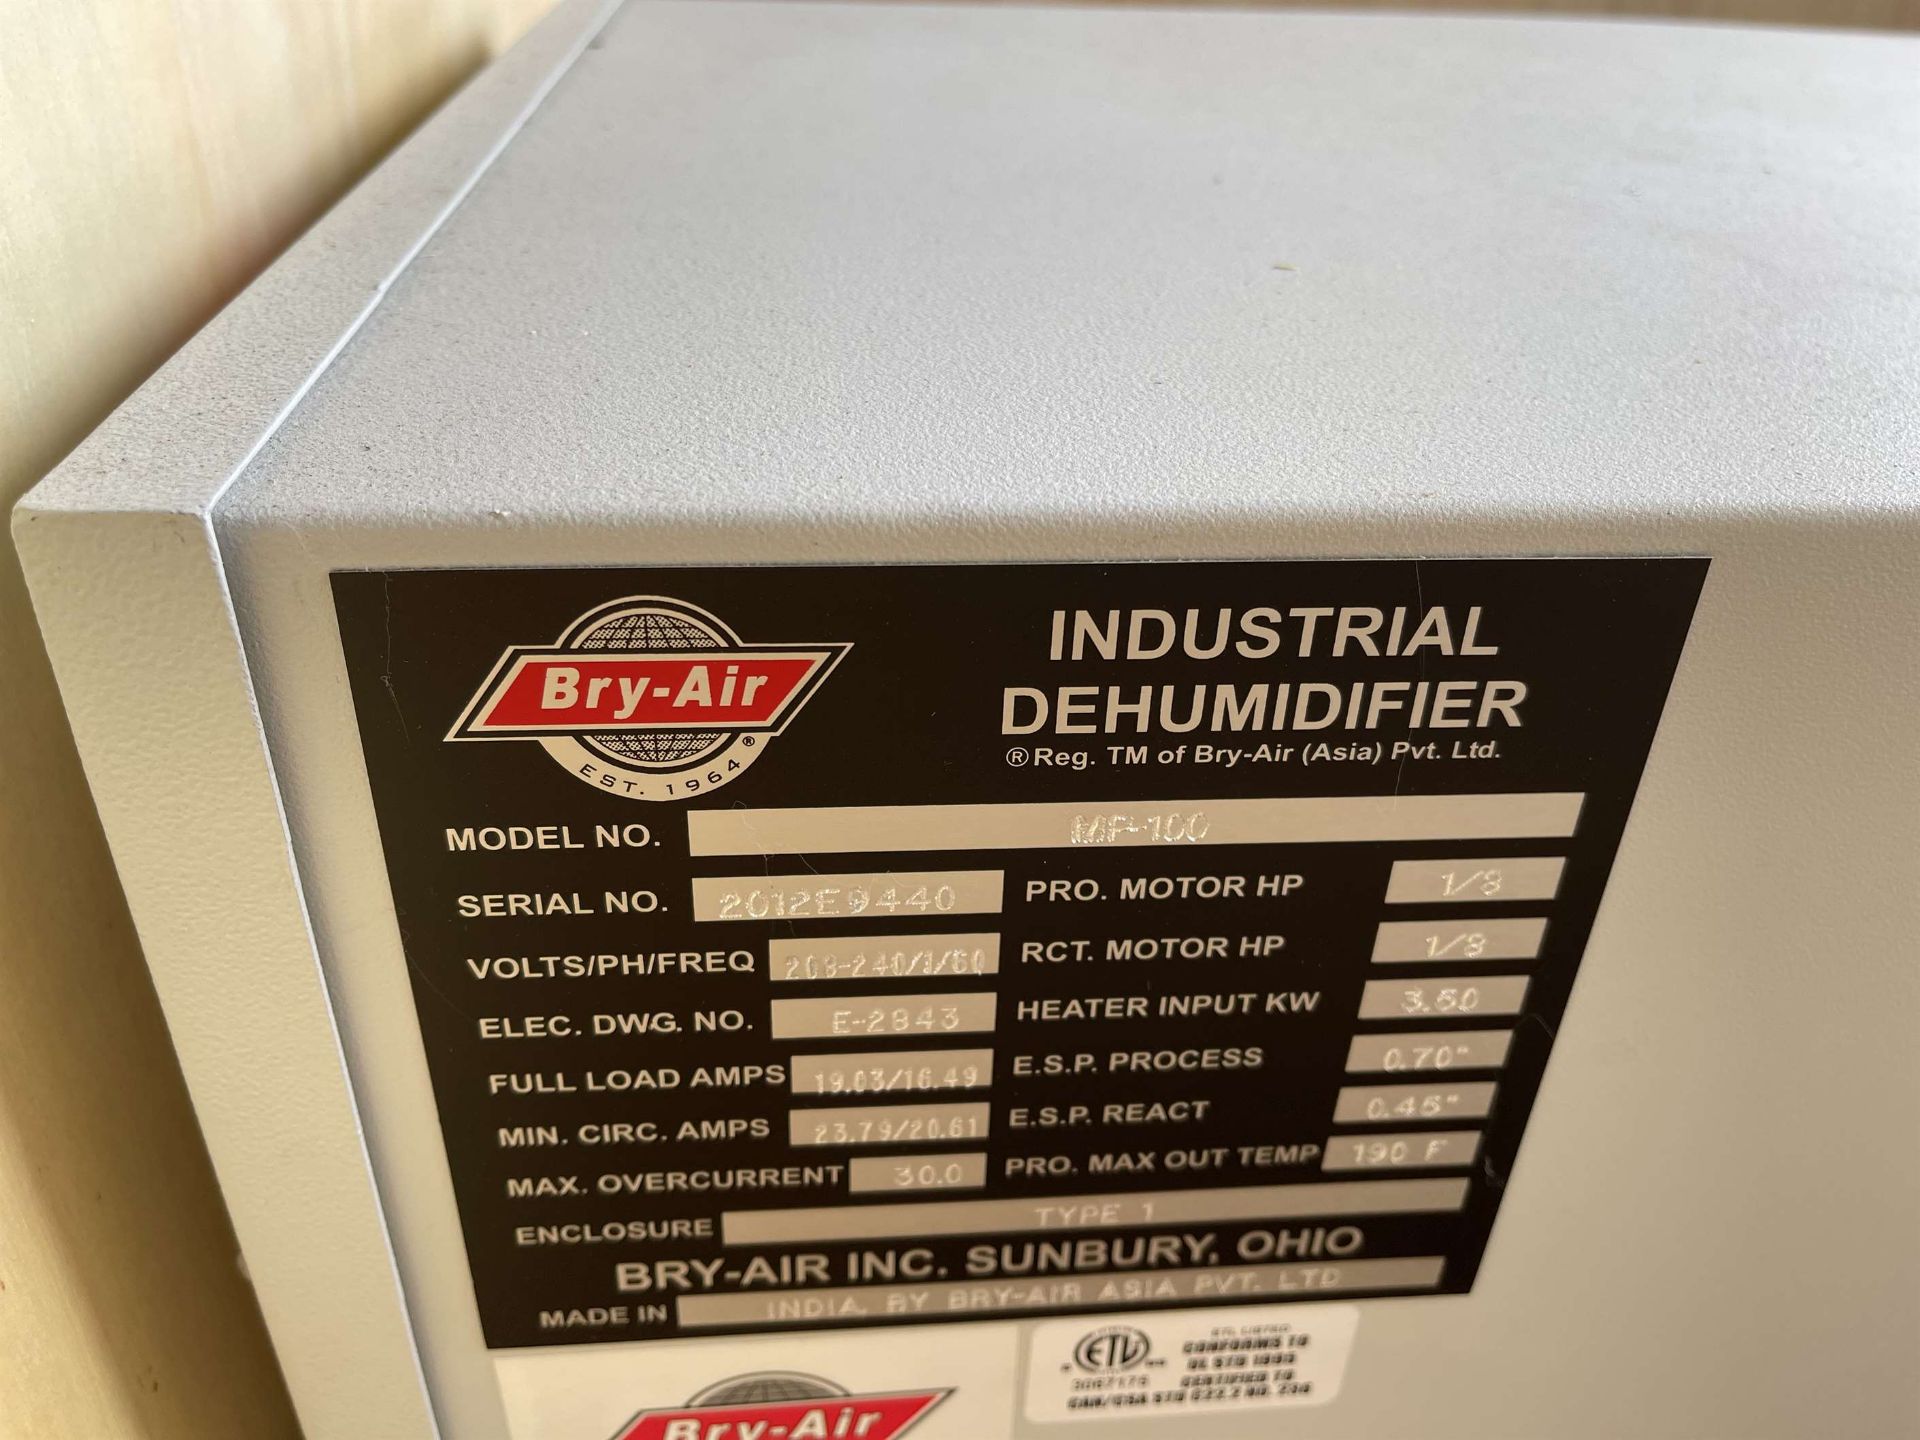 BRY-AIR Mini Pac 100 Industrial Humidifier, s/n 2012E9440, 1/8 HP, 3.5 KW Heater, 190 Degree Pro. - Image 4 of 4